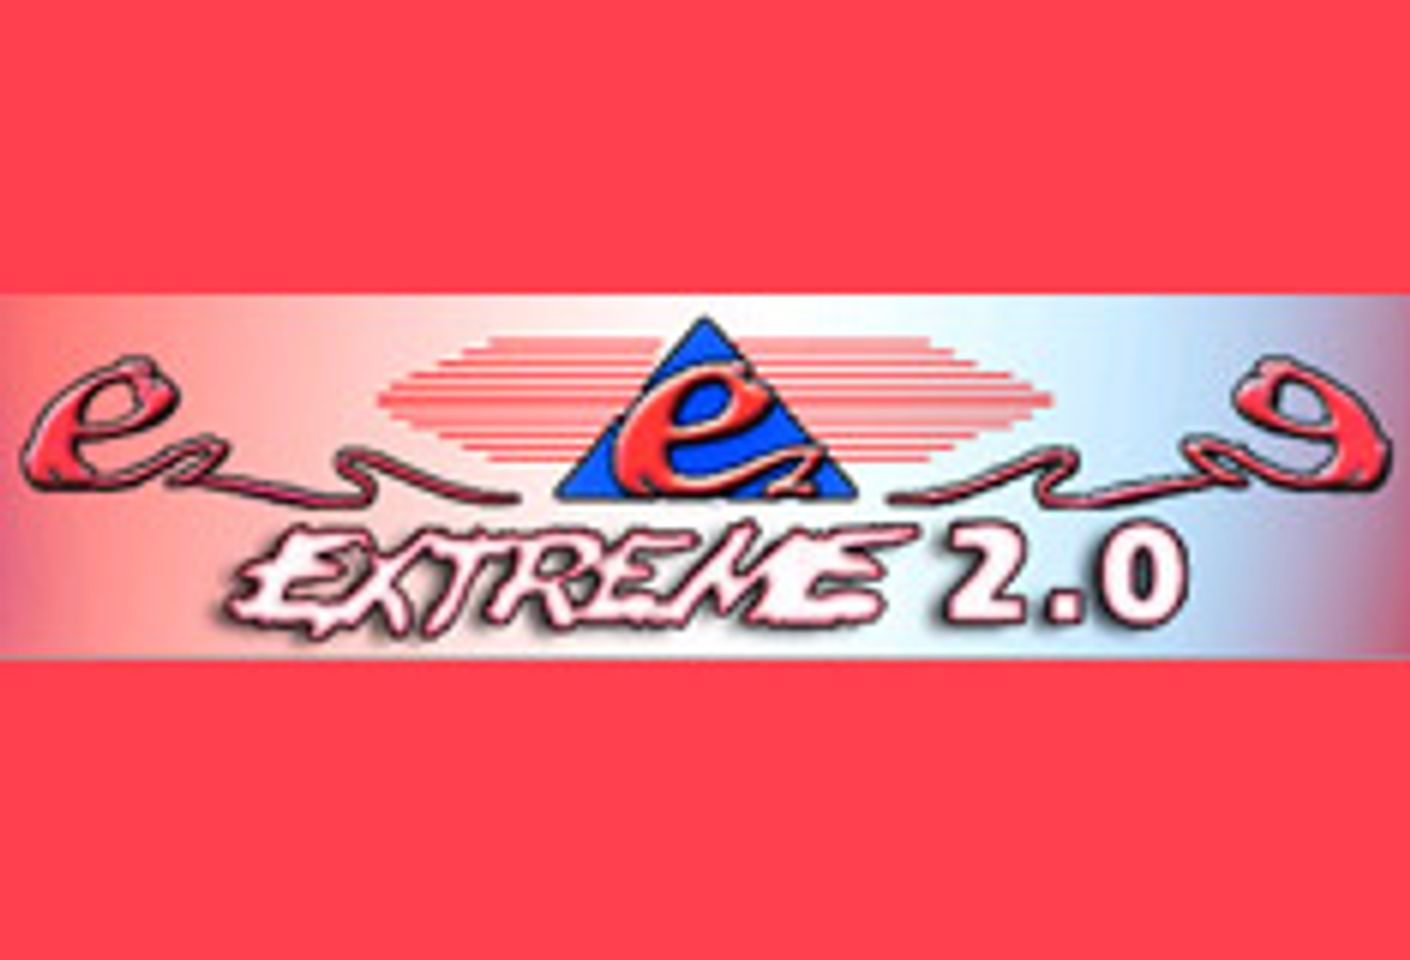 Extreme Creates the Extreme Video Network